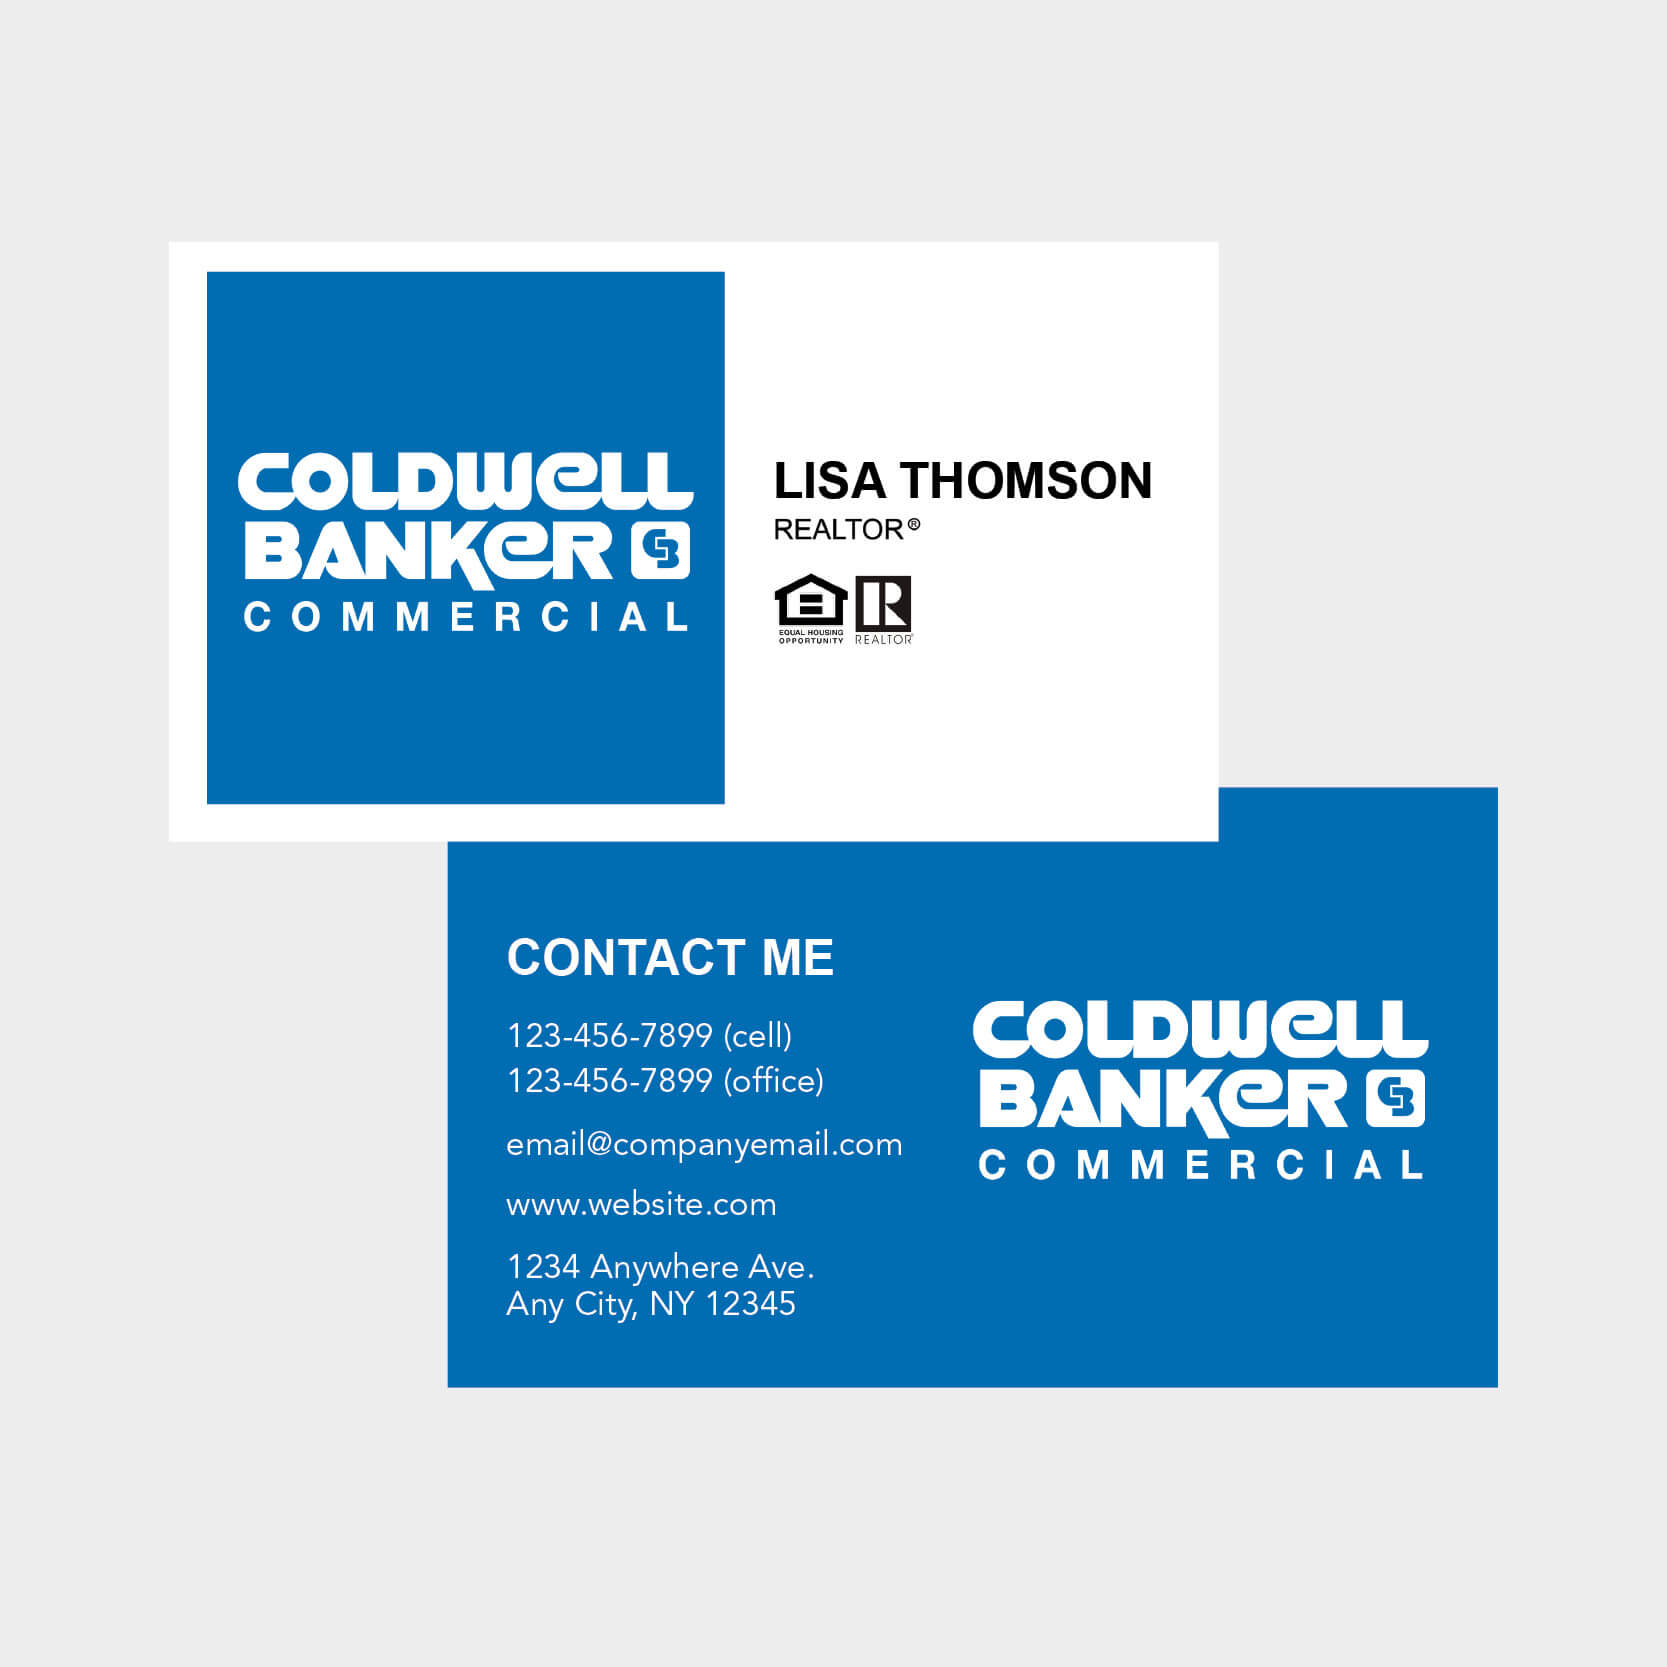 Coldwell Banker Business Cards In Coldwell Banker Business Card Template